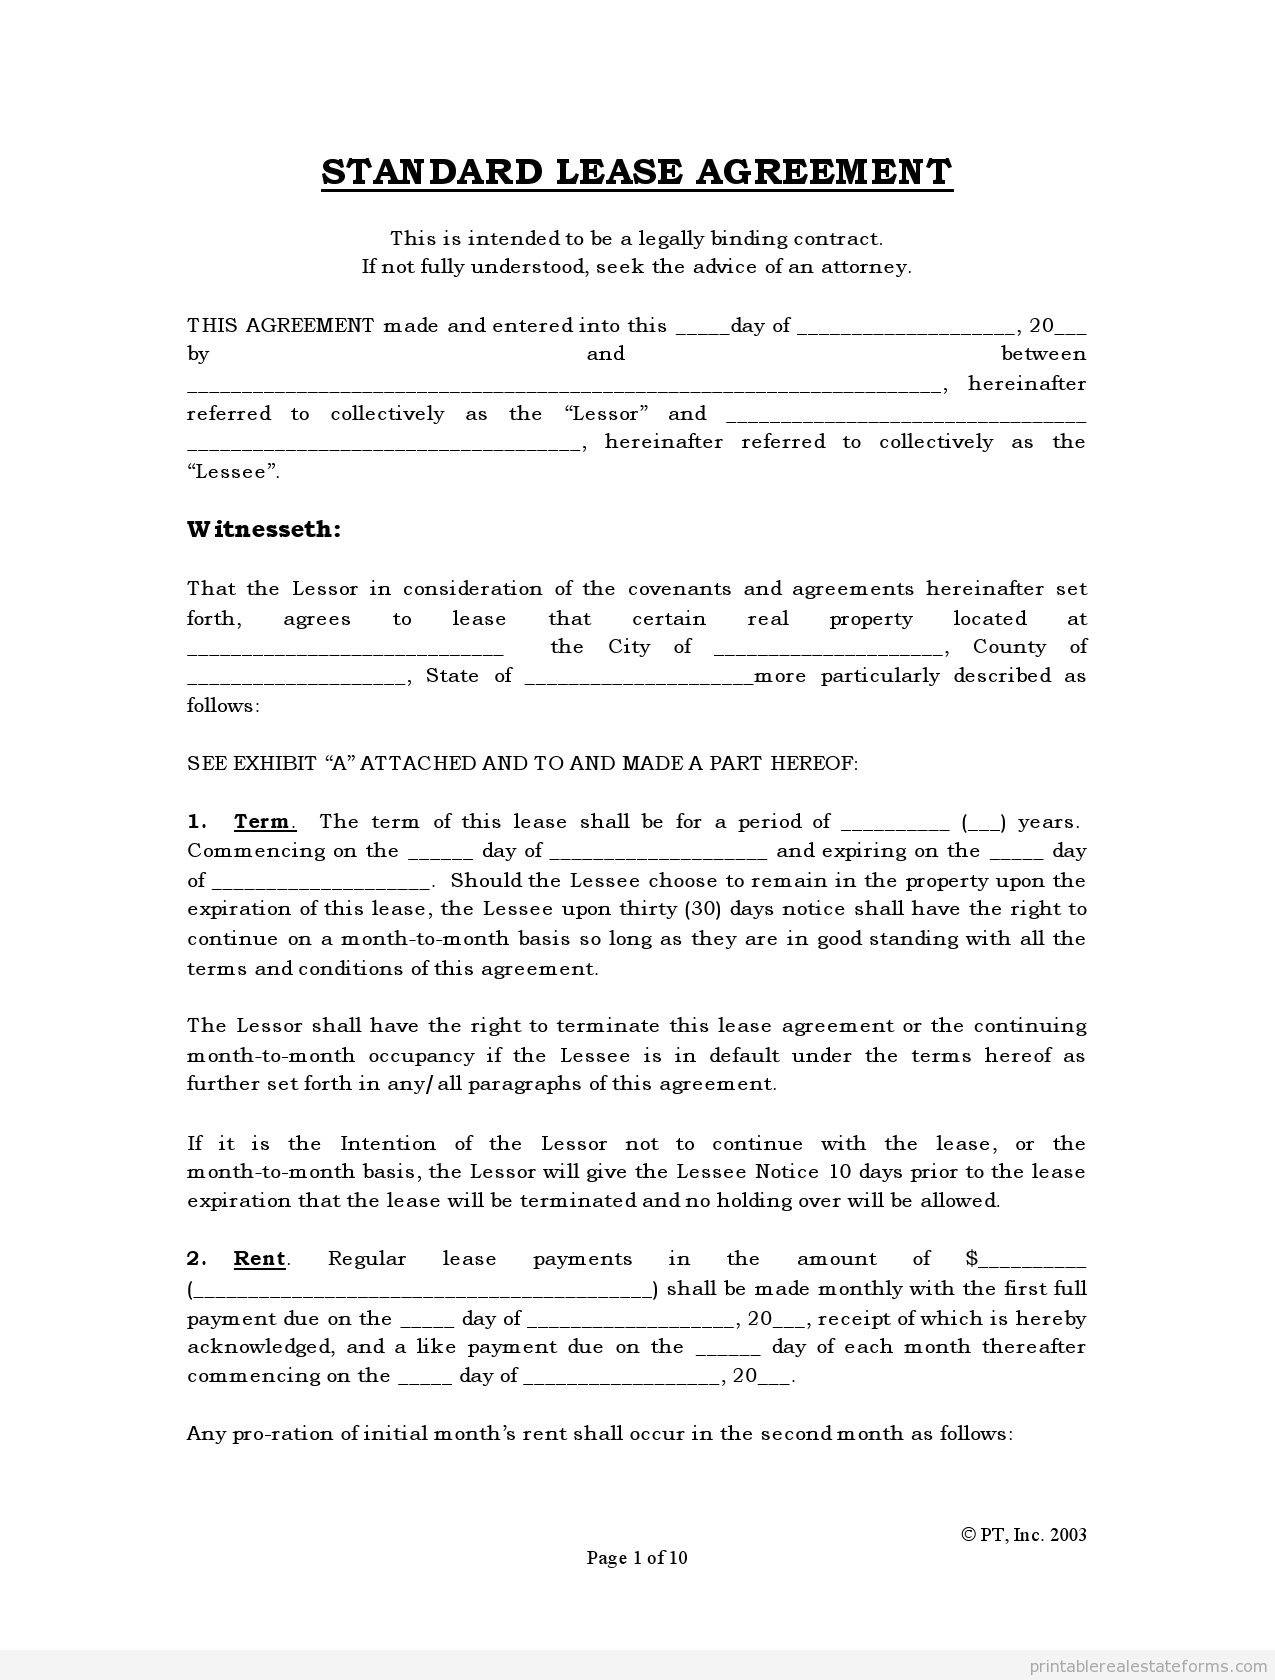 Free Printable Commercial Lease Agreement Template Lease Agreement Lease Agreement Free Printable Rental Agreement Templates - Blank Lease Agreement Free Printable